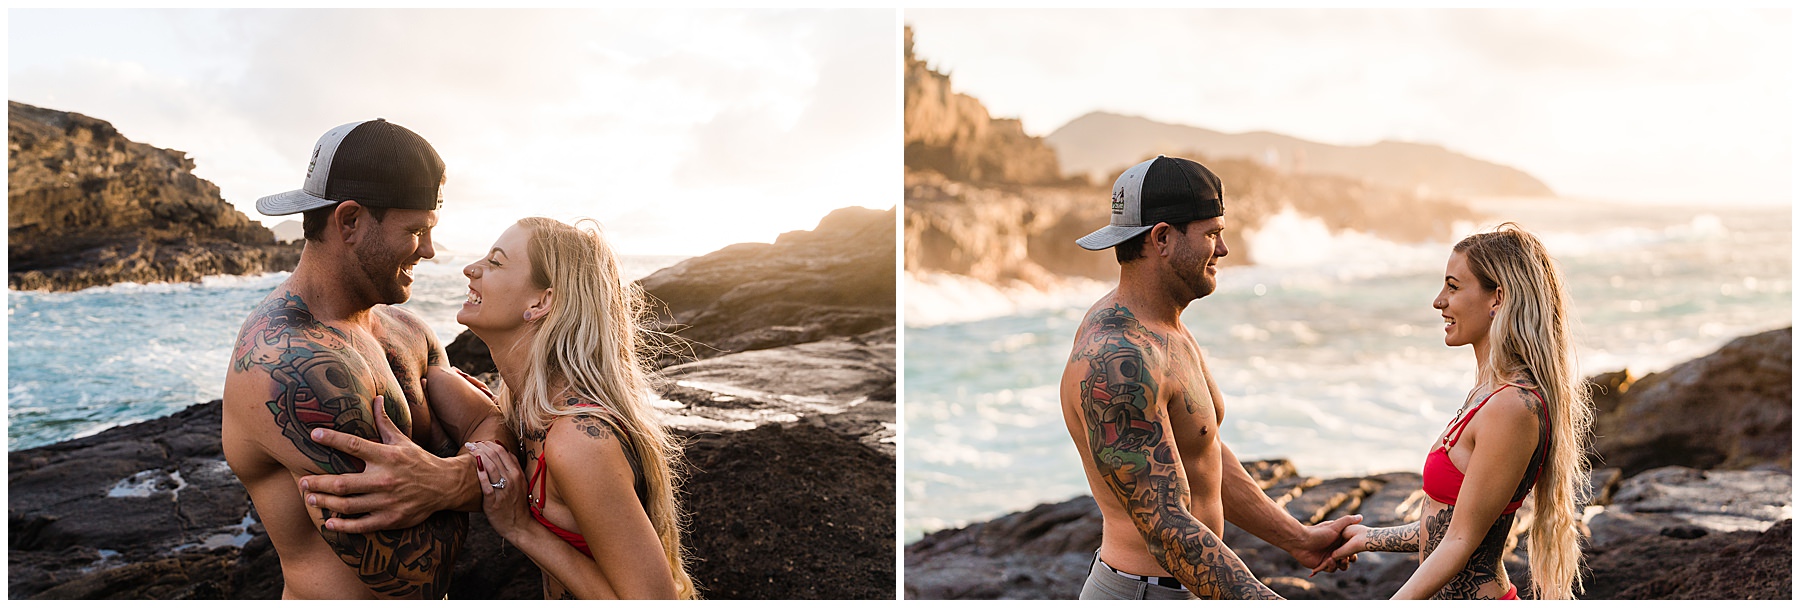 eternity beach engagement session hawaii